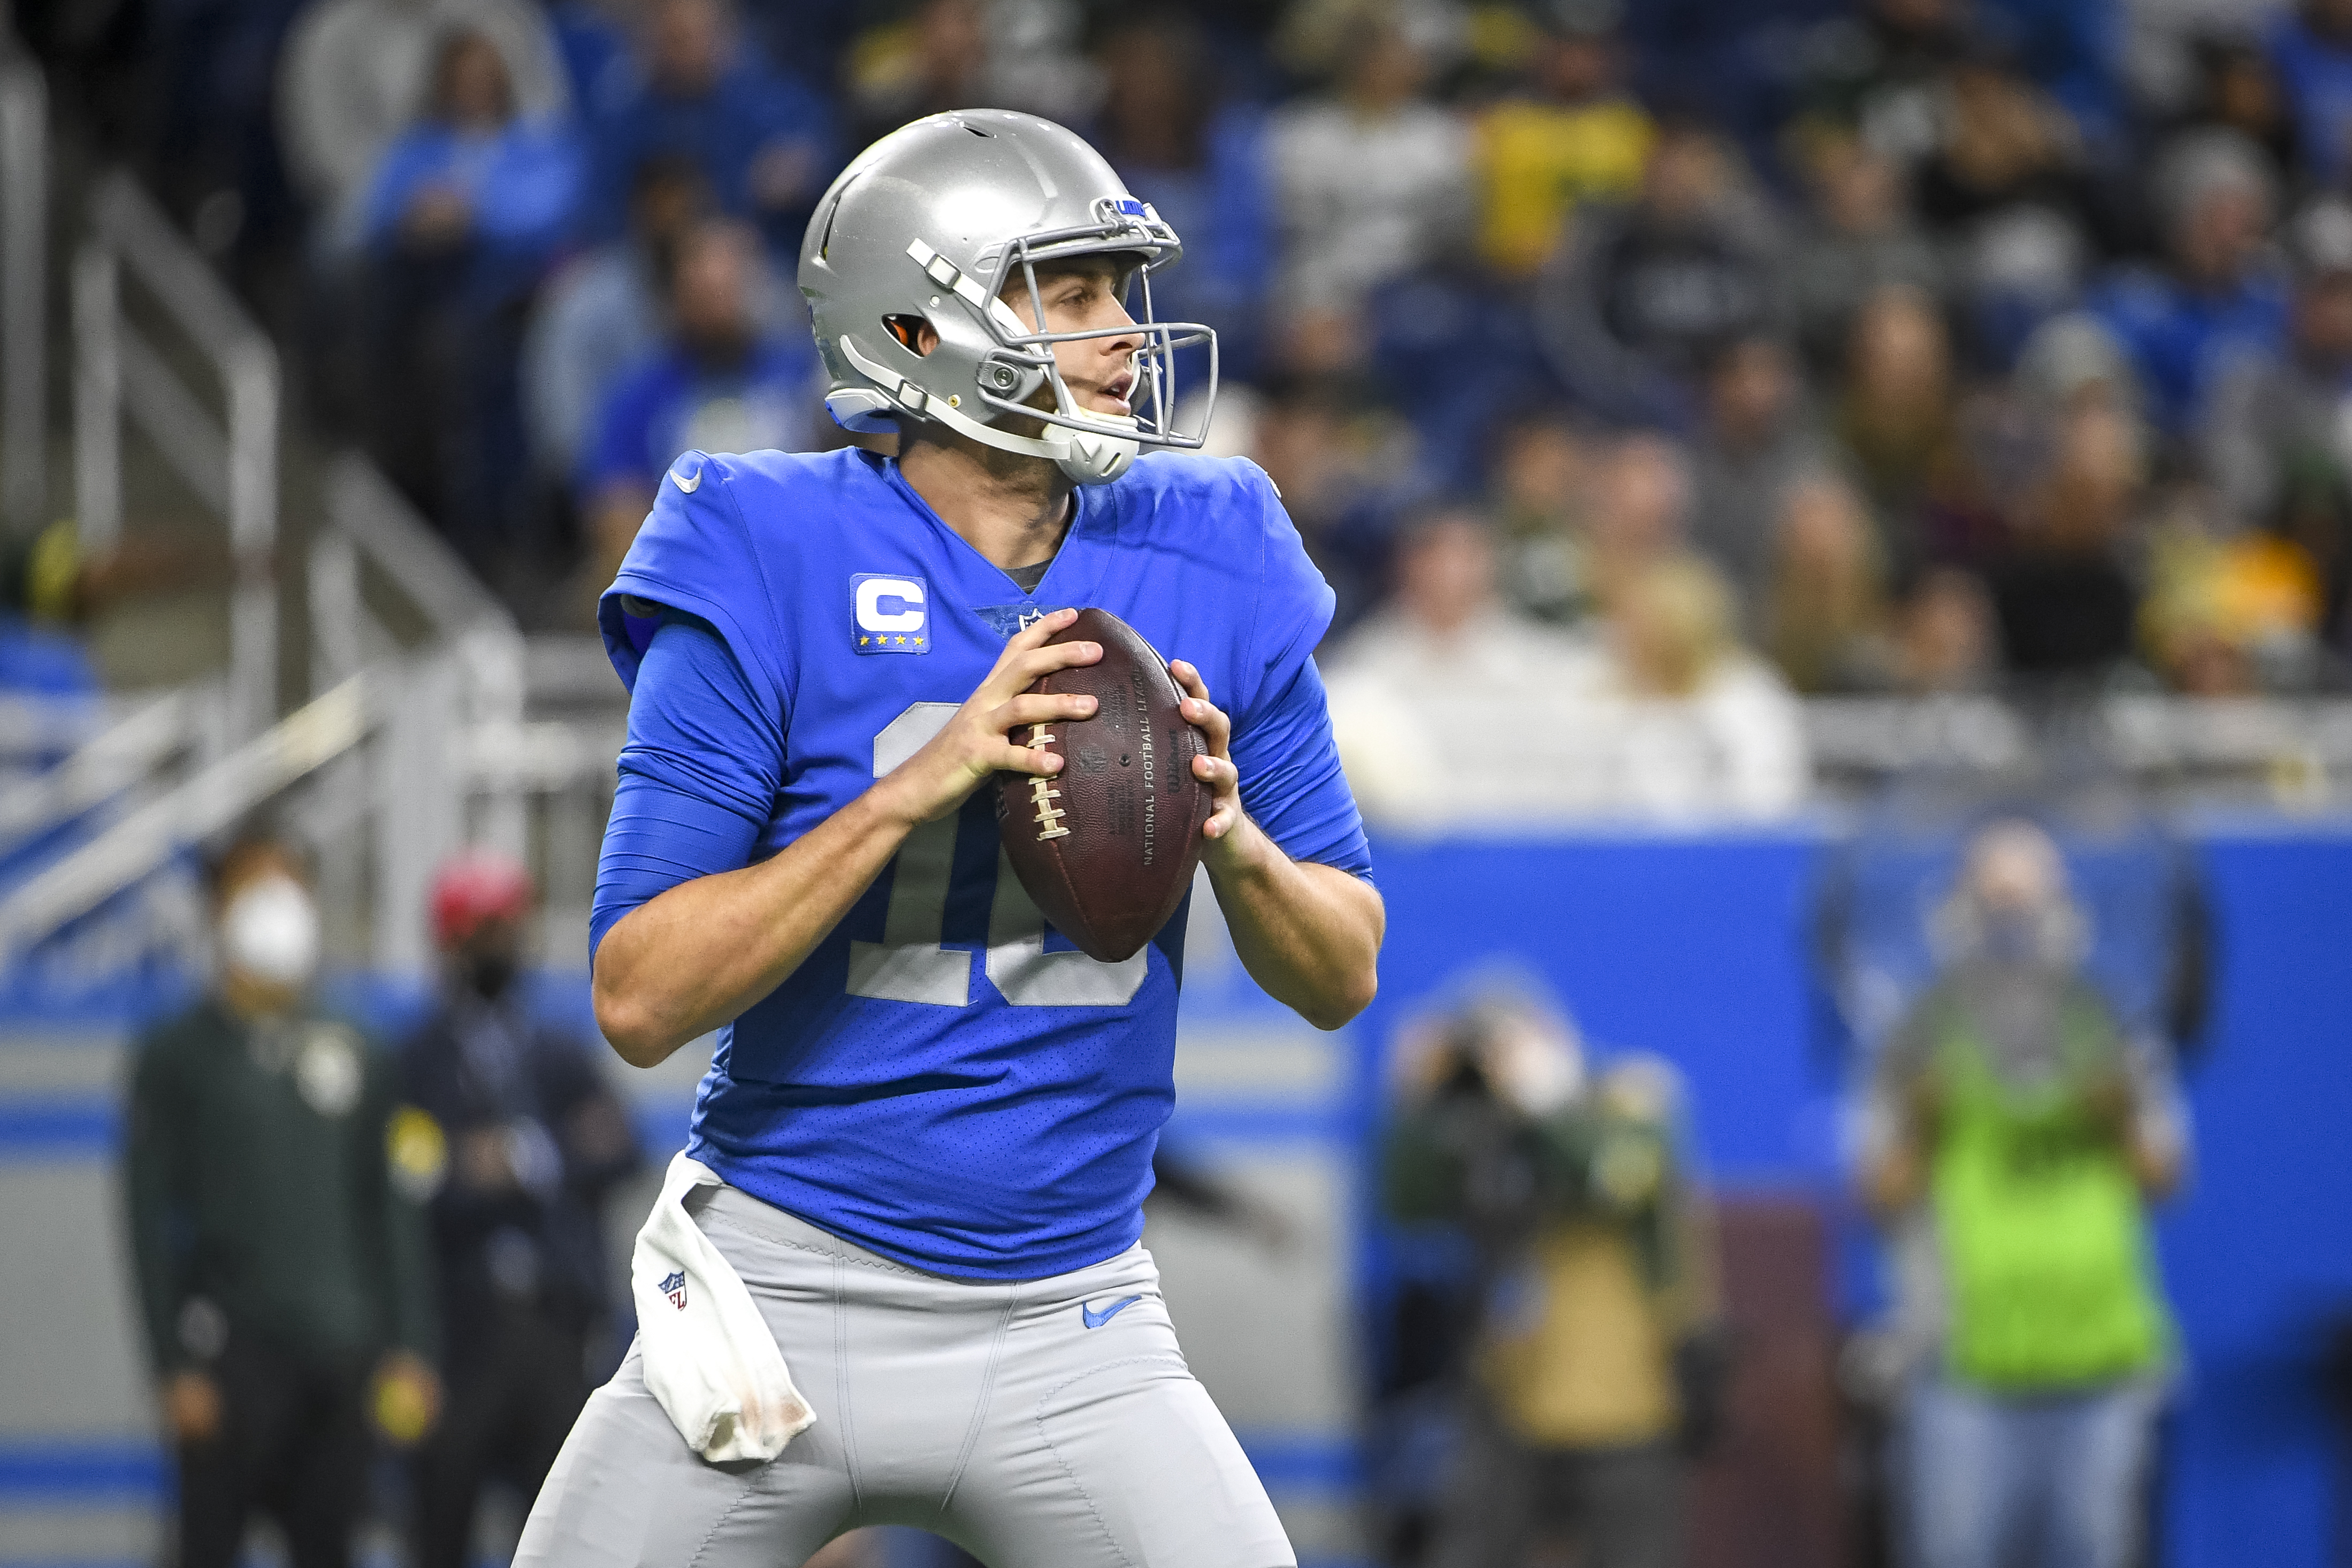 Jared Goff Not Concerned If Lions Draft QB, Unsure If He’d Enjoy Mentor Role